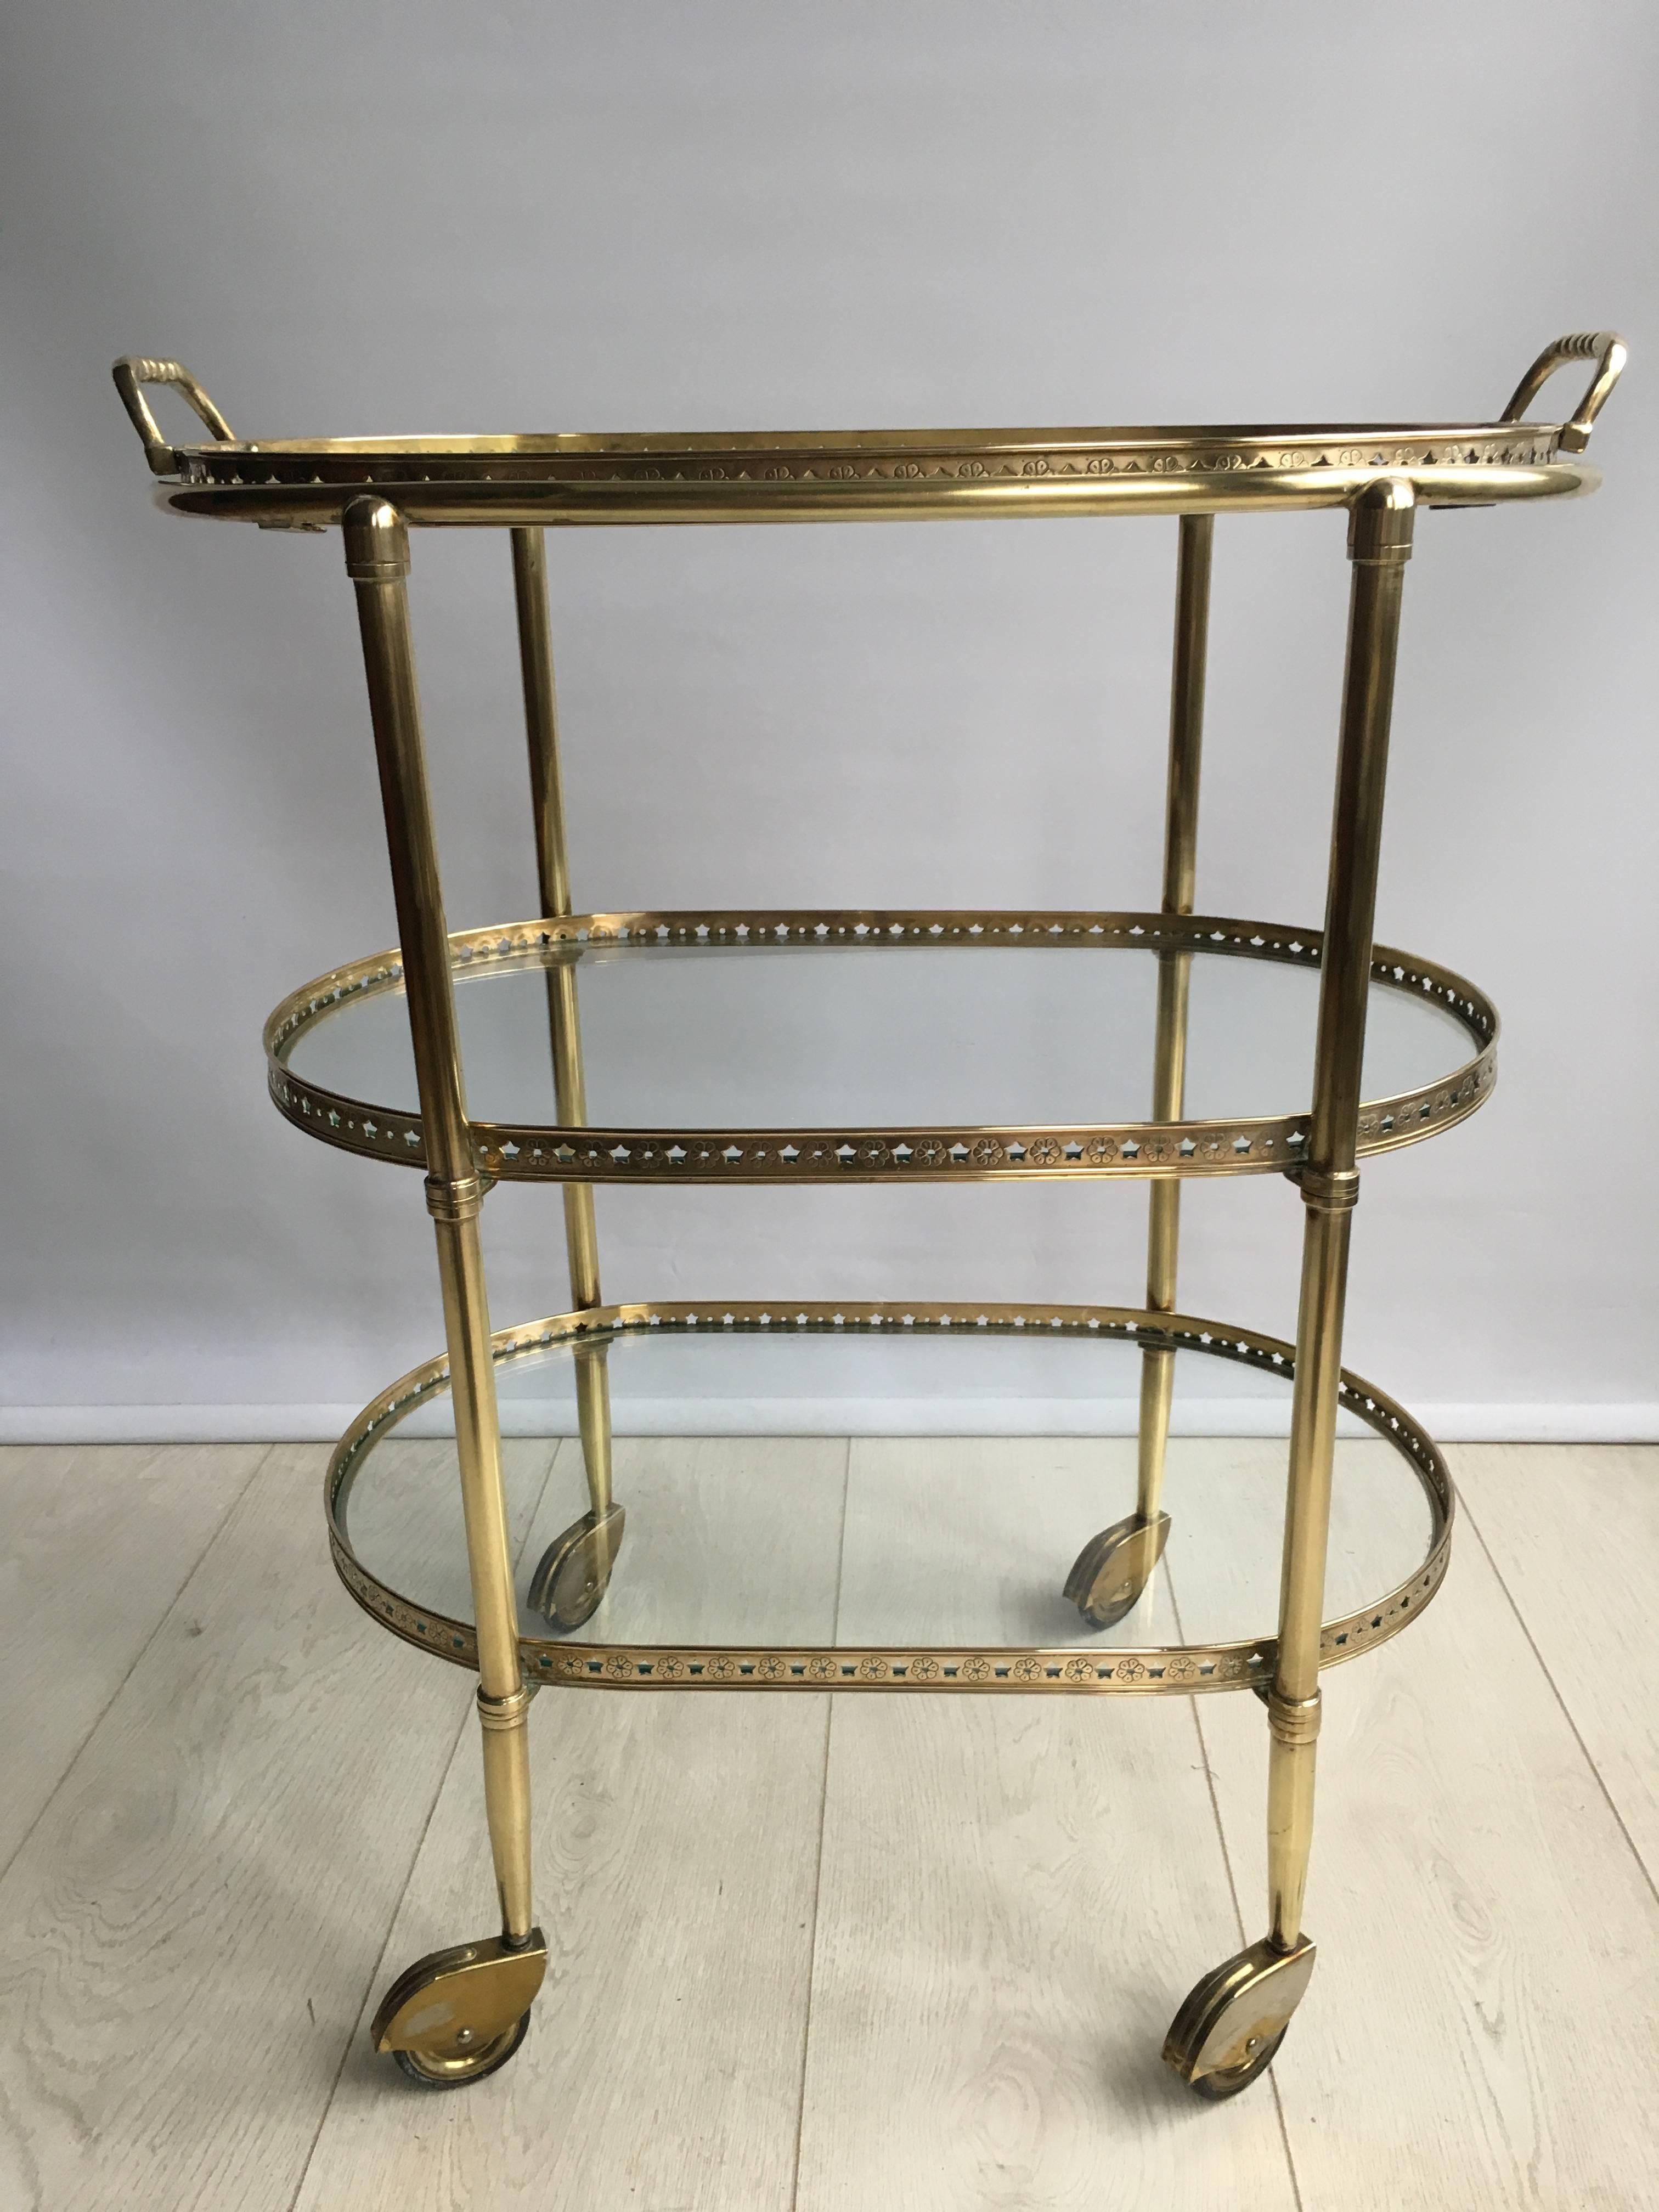 Attractive brass drinks trolley from France c1950

Star detailing to the lift off tray

Top tray measures 51cm wide, 30.5cm deep and stands 63cm tall 